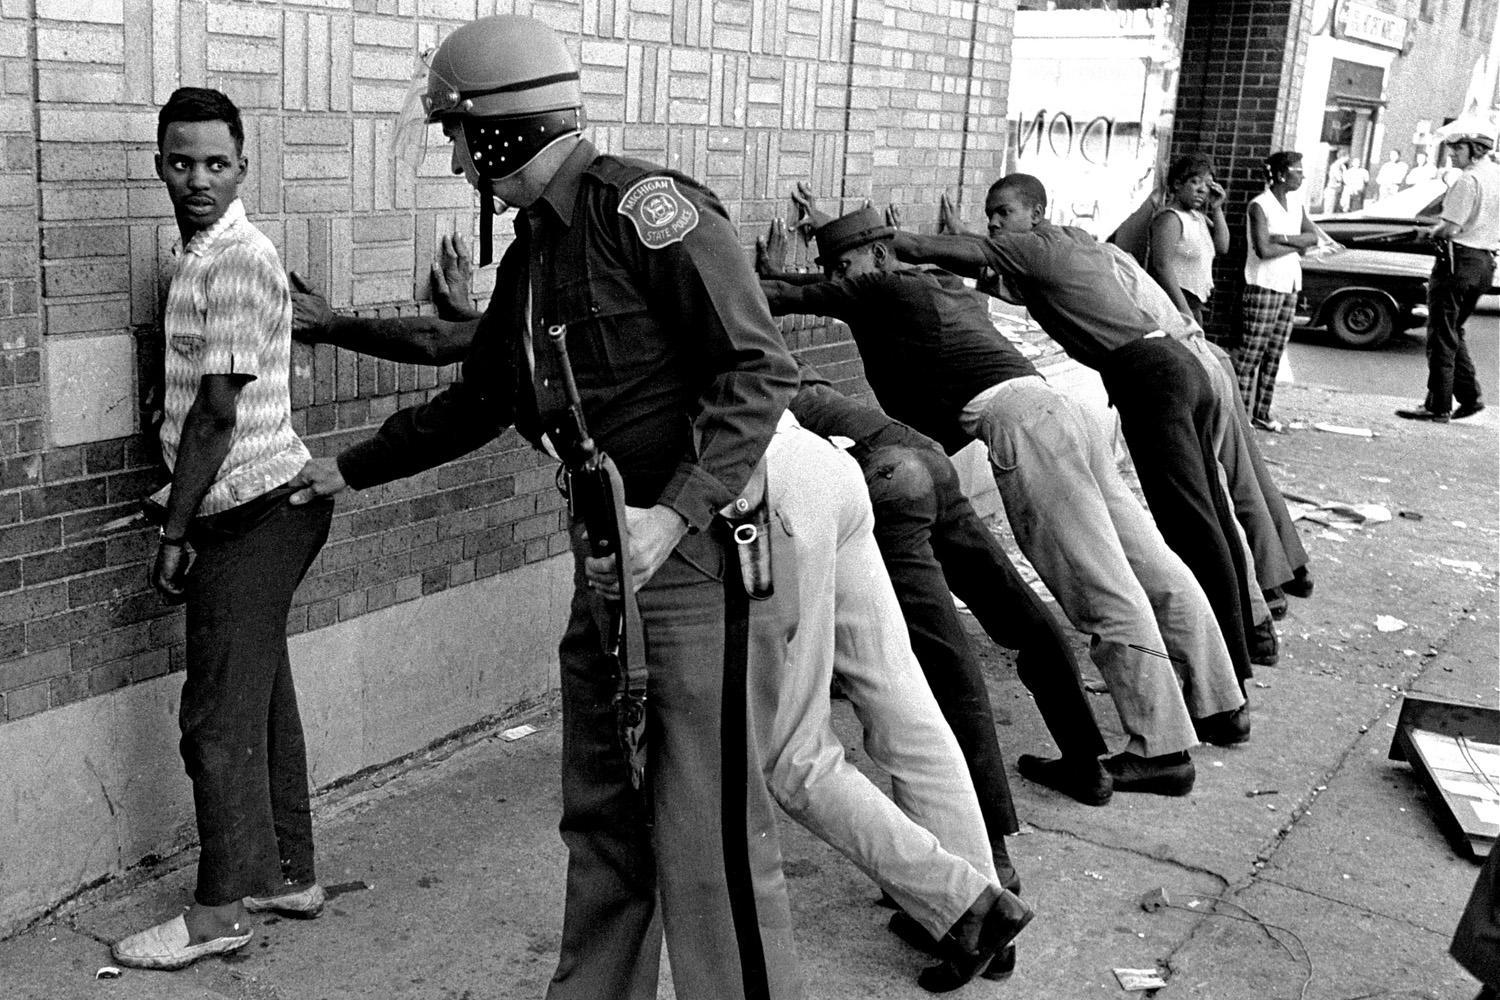 FILE - In this July 24, 1967 file photo, a Michigan State police officer searches a youth on Detroits 12th Street where looting was still in progress after the previous days rioting. The last surviving member of the Kerner Commission says he remains haunted that the panels recommendations on US race relation and poverty were never adopted, but he is hopeful they will be one day. Former U.S. Sen. Fred Harris says 50 years after working on a report to examine the causes of the late 1960s race riots he strongly feels that poverty and structural racism still enflames racial tensions even as the United States becomes more diverse. (AP Photo/File)